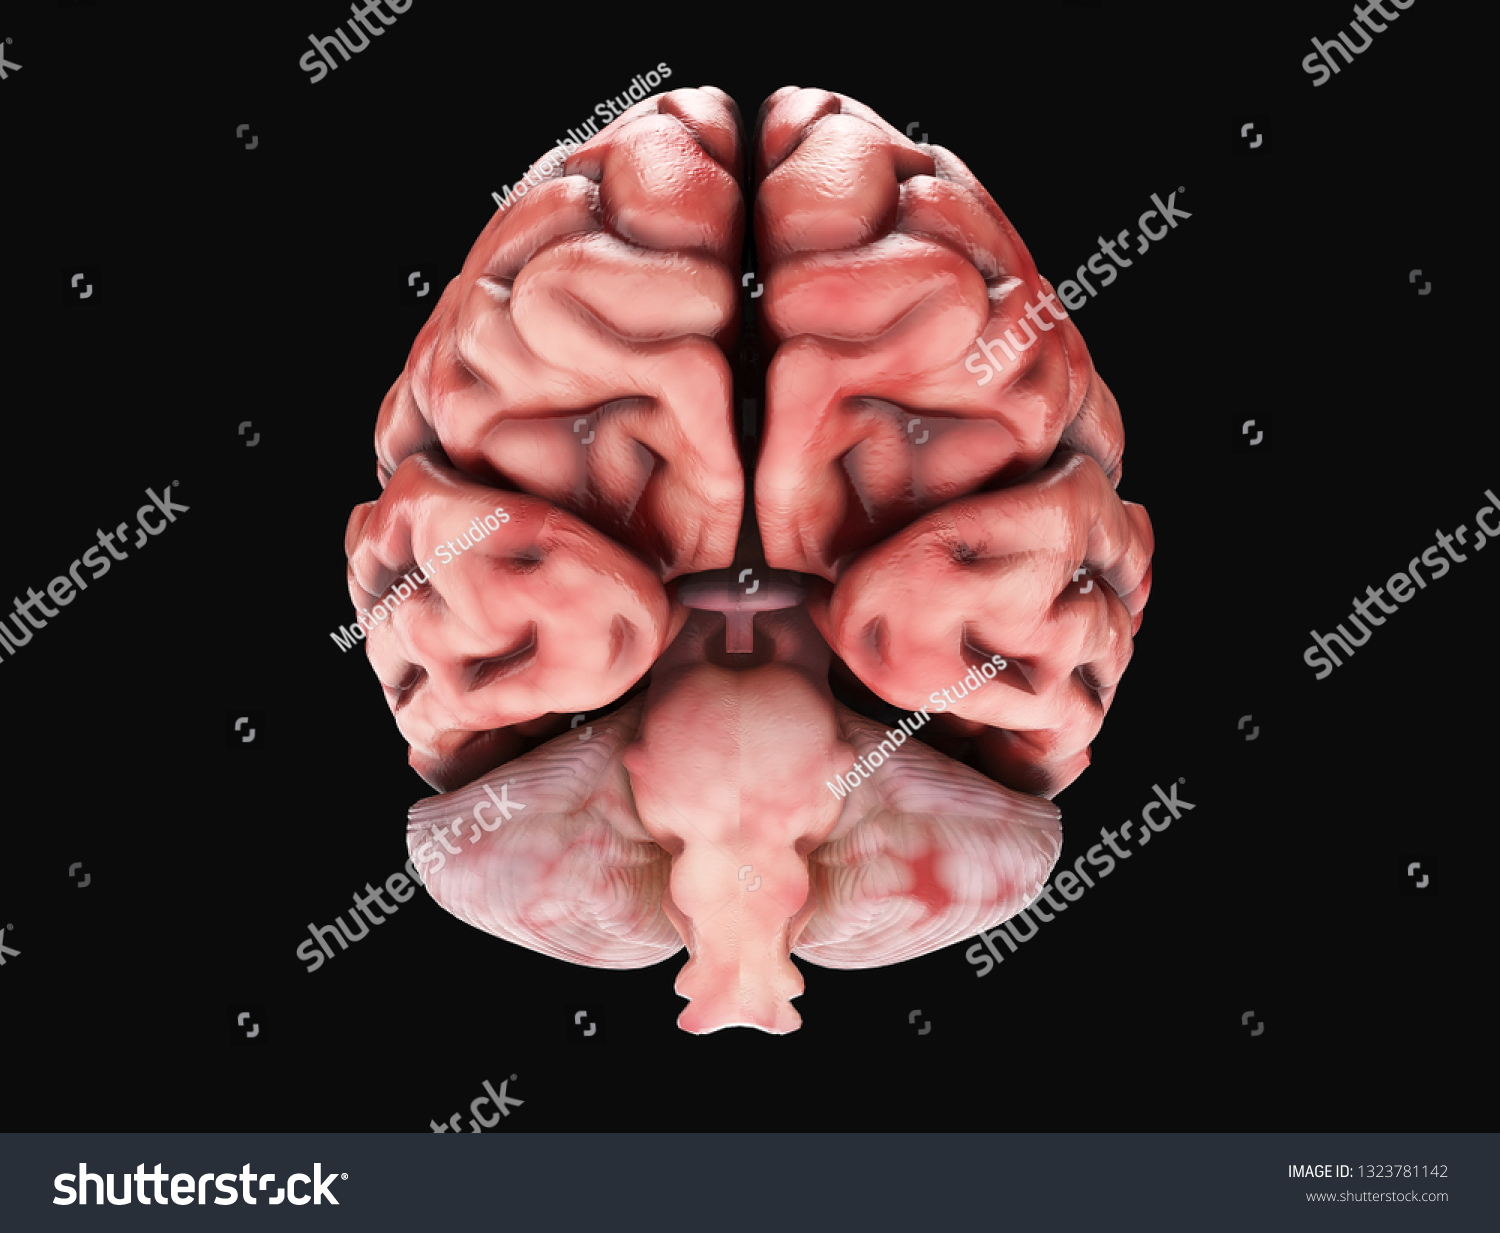 Medically accurate illustration of a realistic human brain. 3d rendering #1323781142